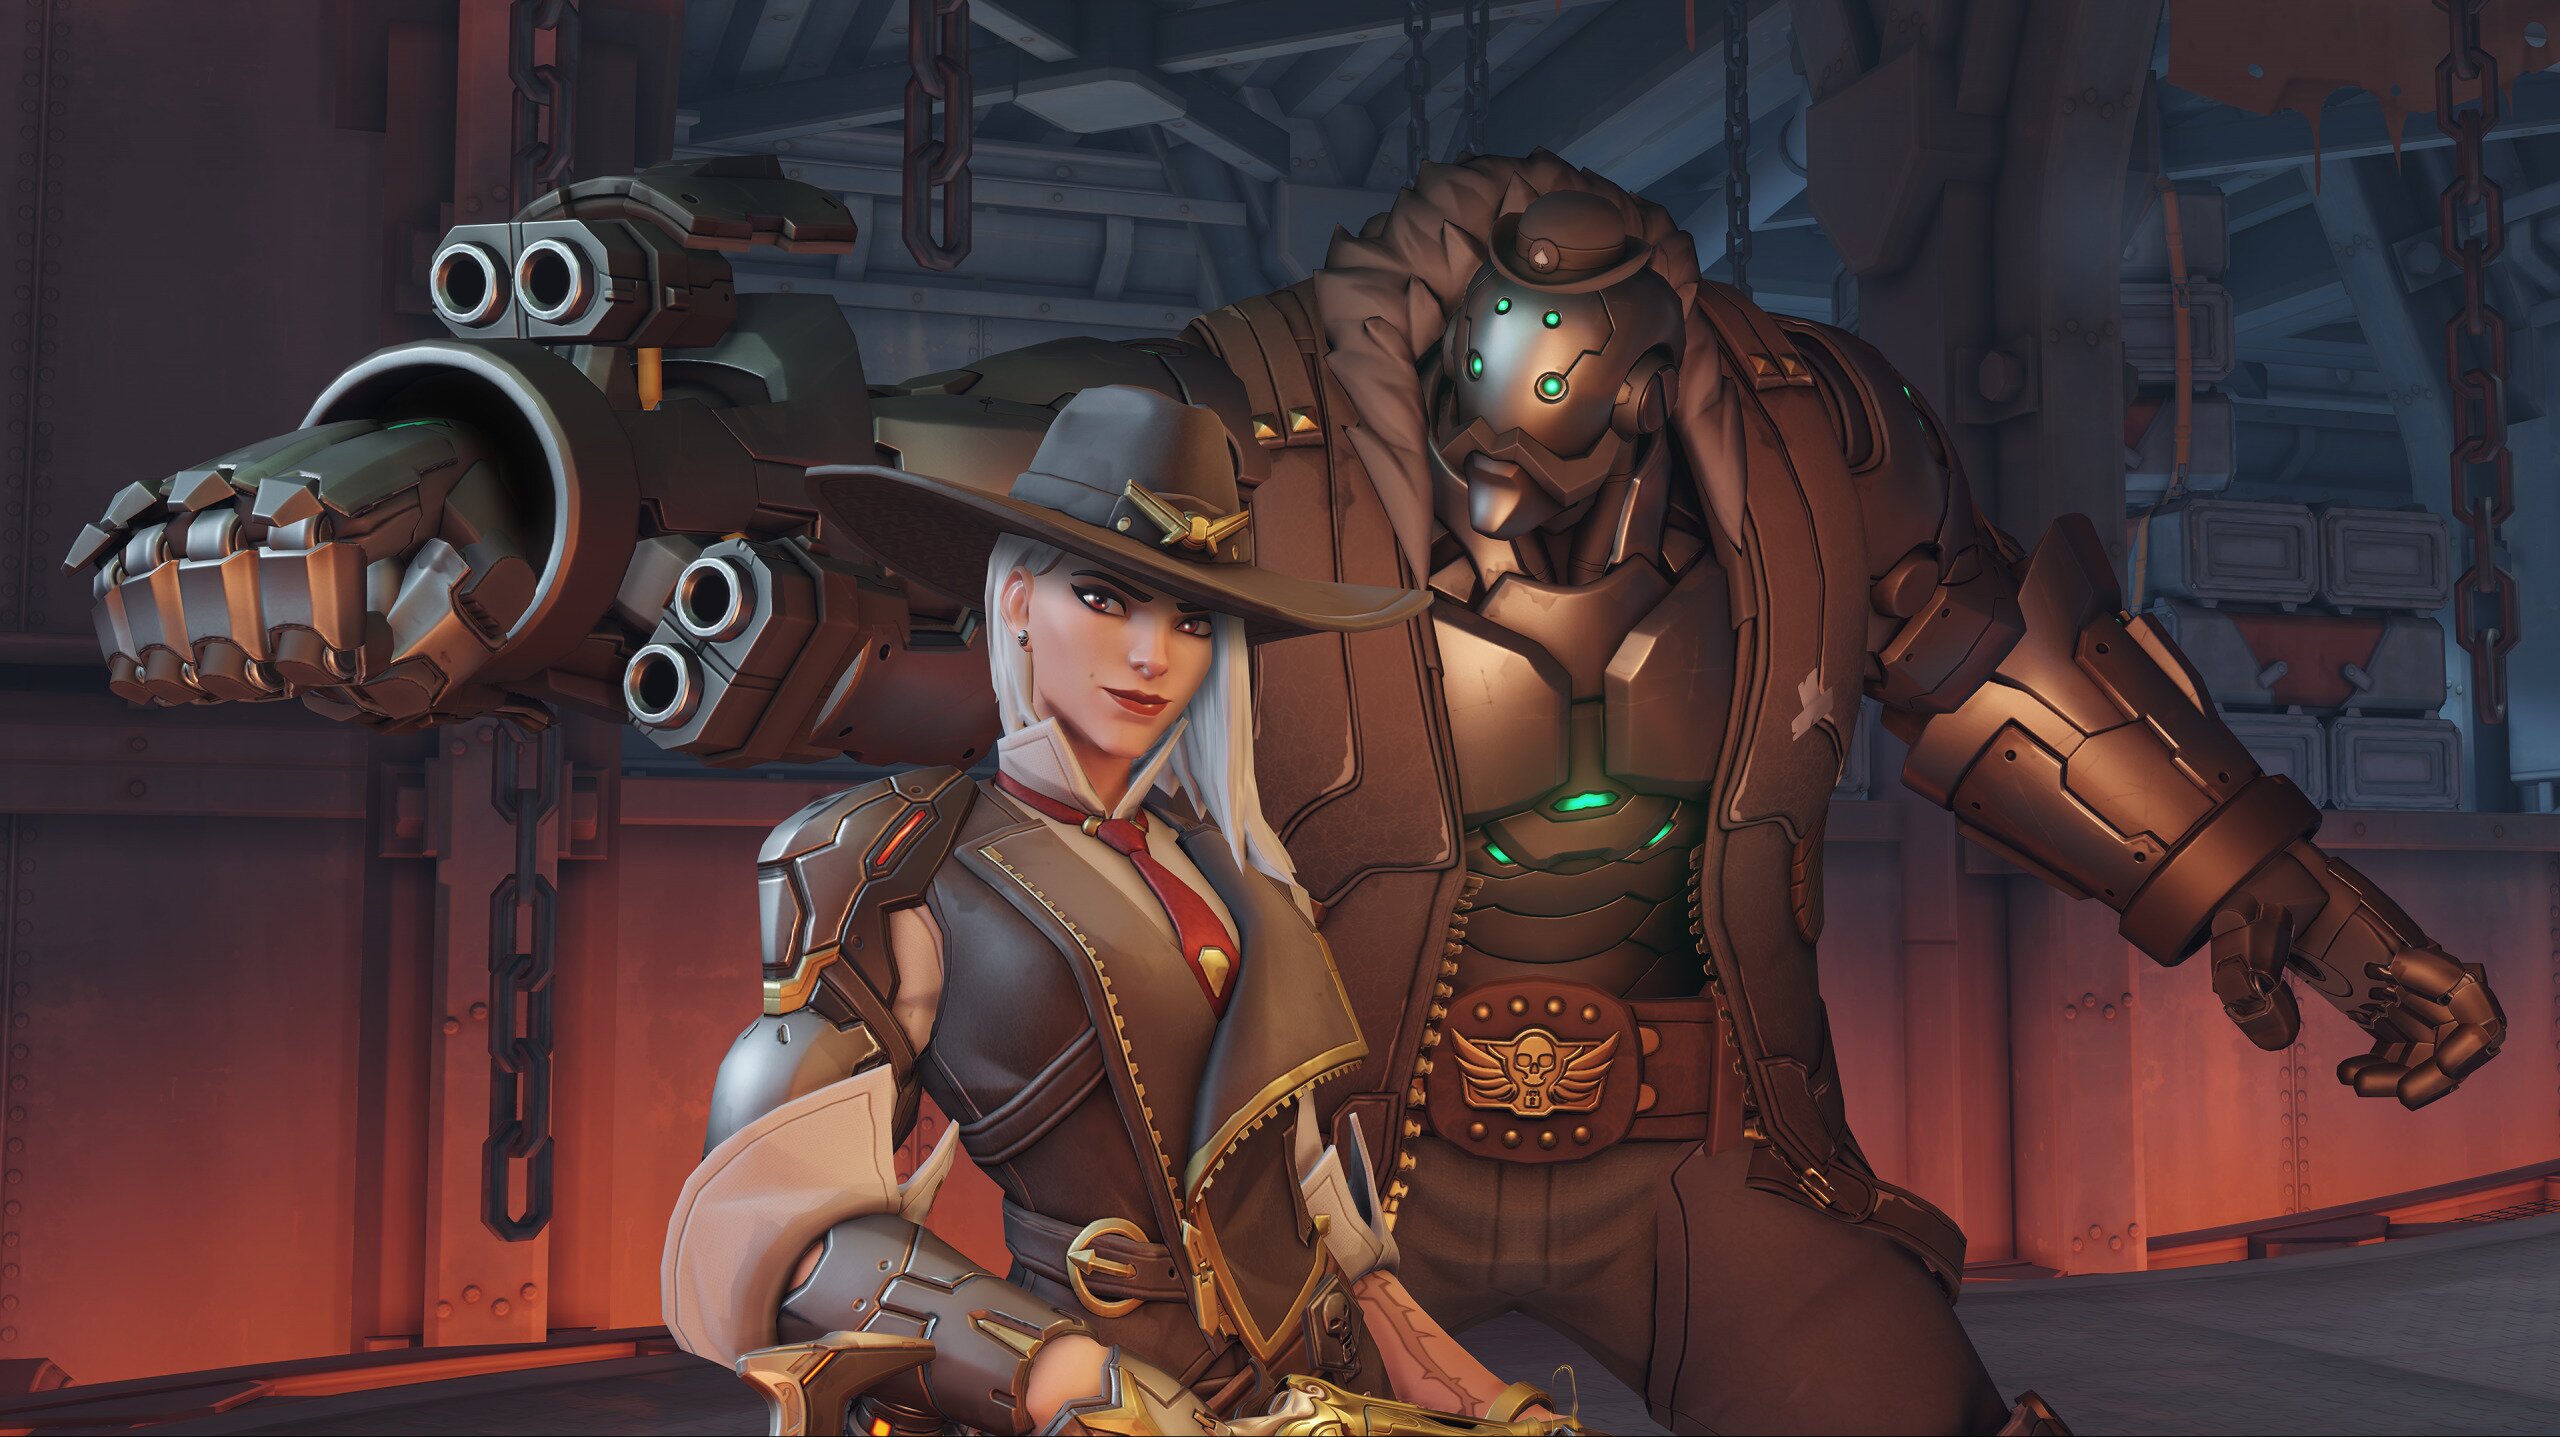 Ashe - the leader if the notorious Deadlock Gang - was unveiled as Hero 29 at Blizzcon. (Image courtesy of Blizzard Entertainment)